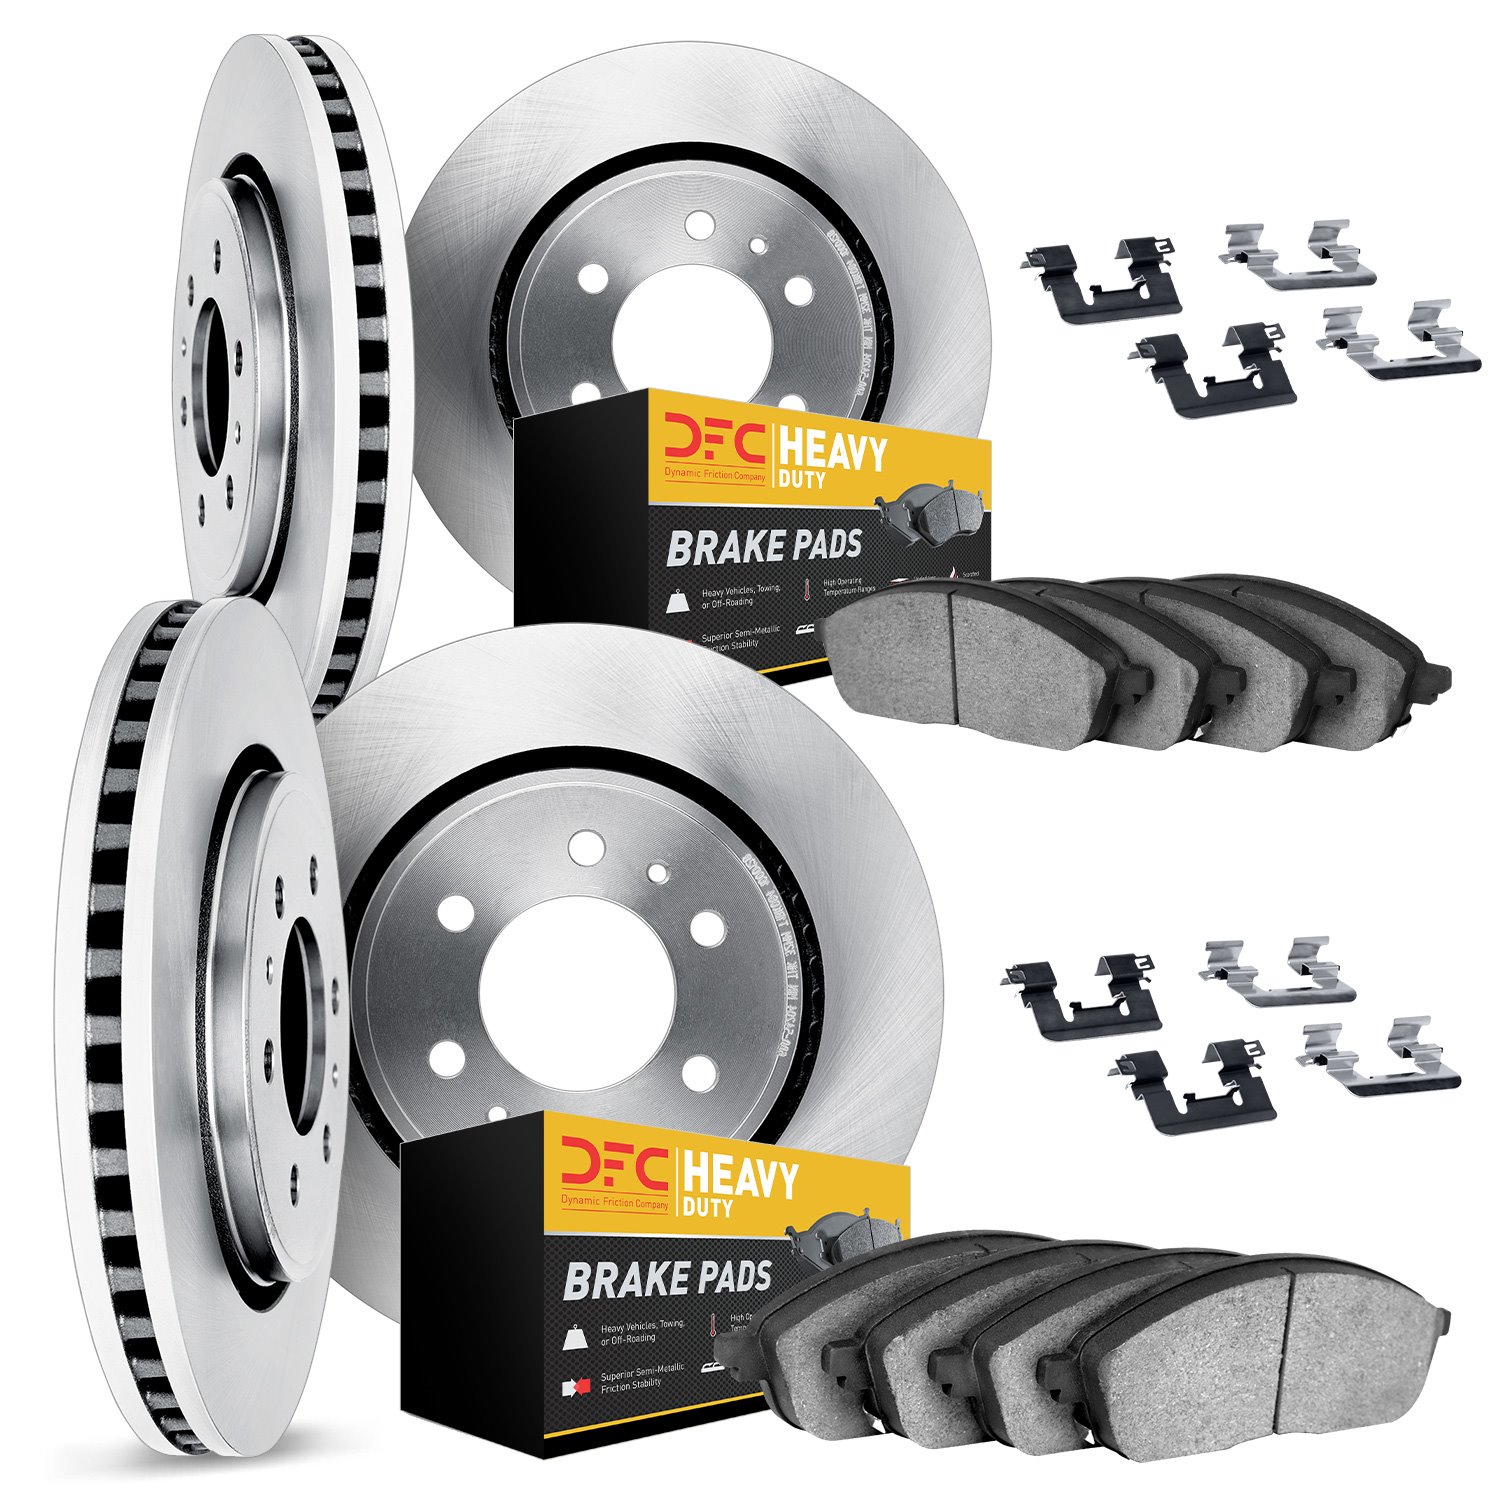 6214-67006 Brake Rotors w/Heavy-Duty Brake Pads Kit & Hardware, Fits Select Infiniti/Nissan, Position: Front and Rear